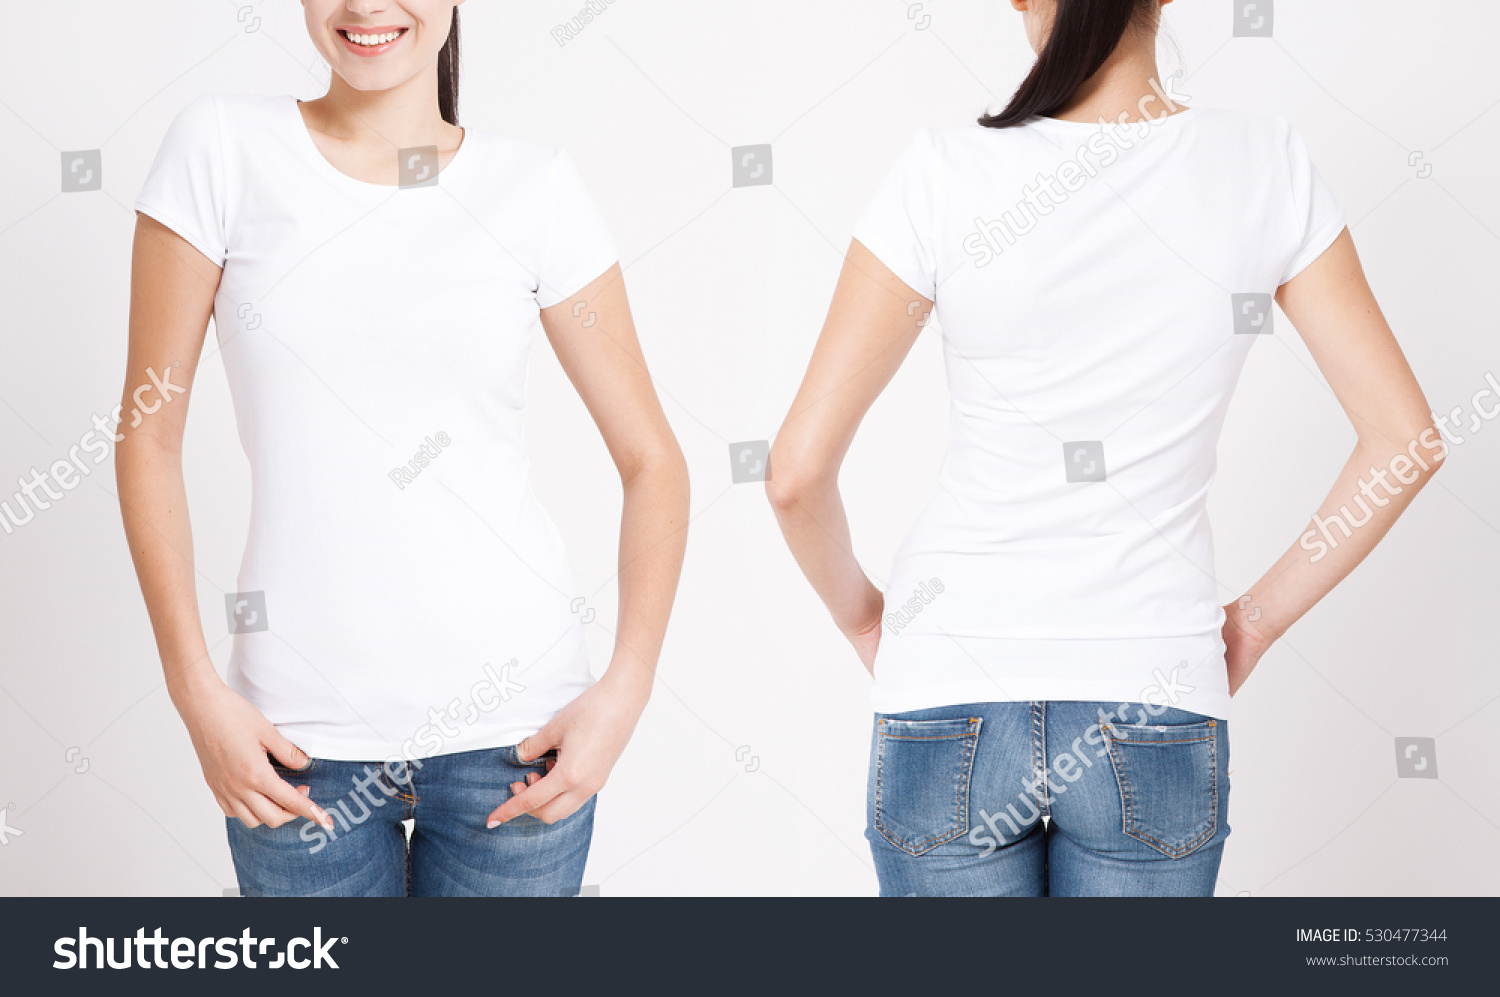 T-shirt design and people concept - close up of young woman in blank white t-shirt, shirt front and rear isolated. Mock up. #530477344